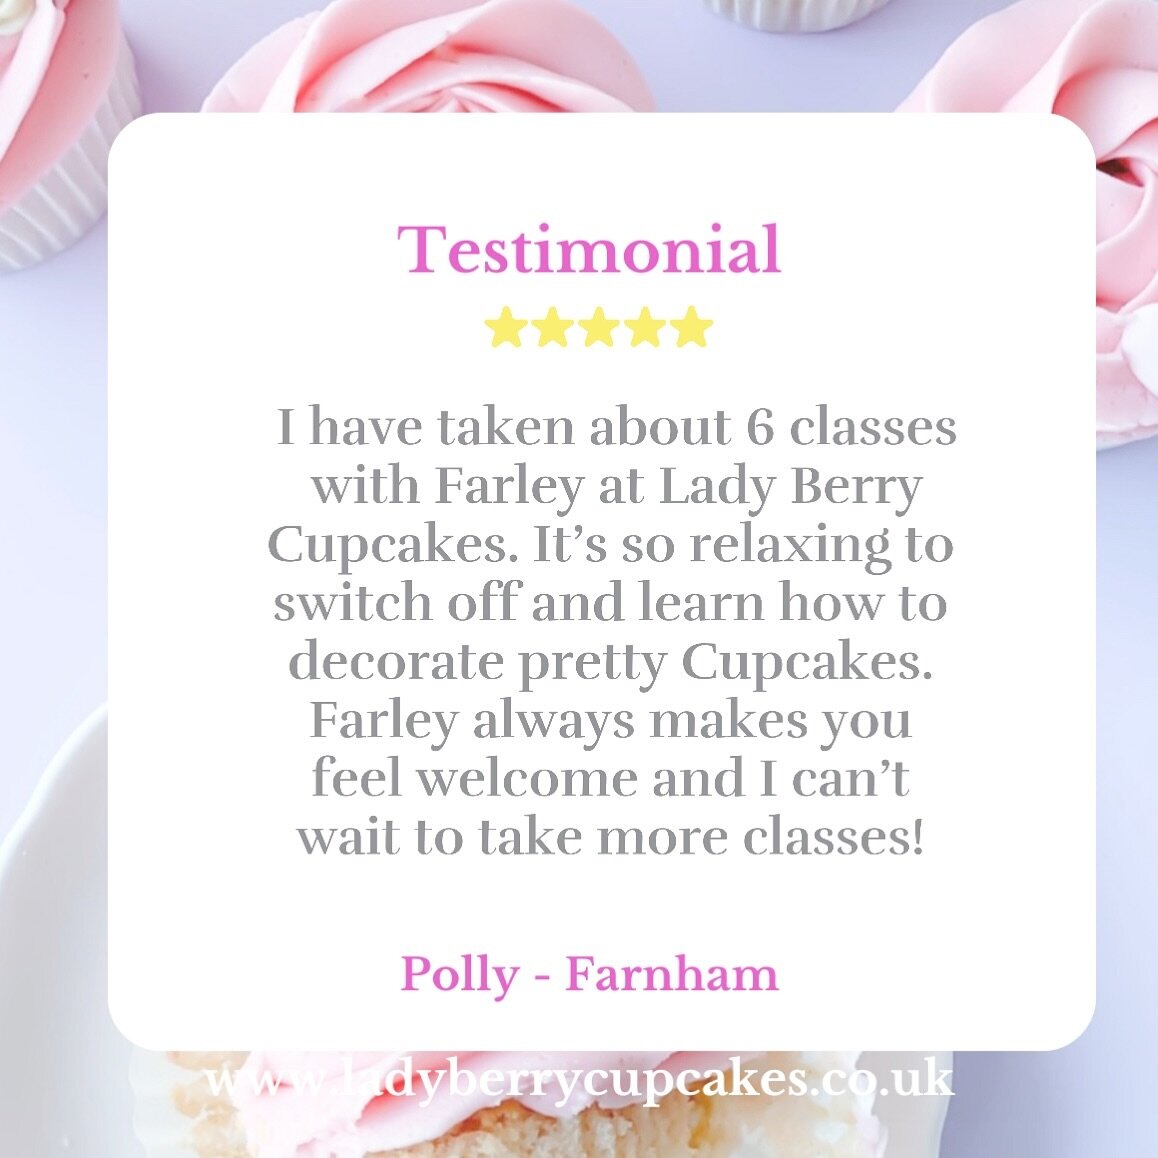 🧁 Cupcake therapy is a THING! It&rsquo;s so relaxing, therapeutic and deliciously enjoyable for all&hellip; 🩷 Thq Polly can&rsquo;t wait to see you again x 

⭐️www.ladyberrycupcakes.co.uk 

#CupcakeTherapy #Therapeutic #CupcakeDecorating #LadyBerry